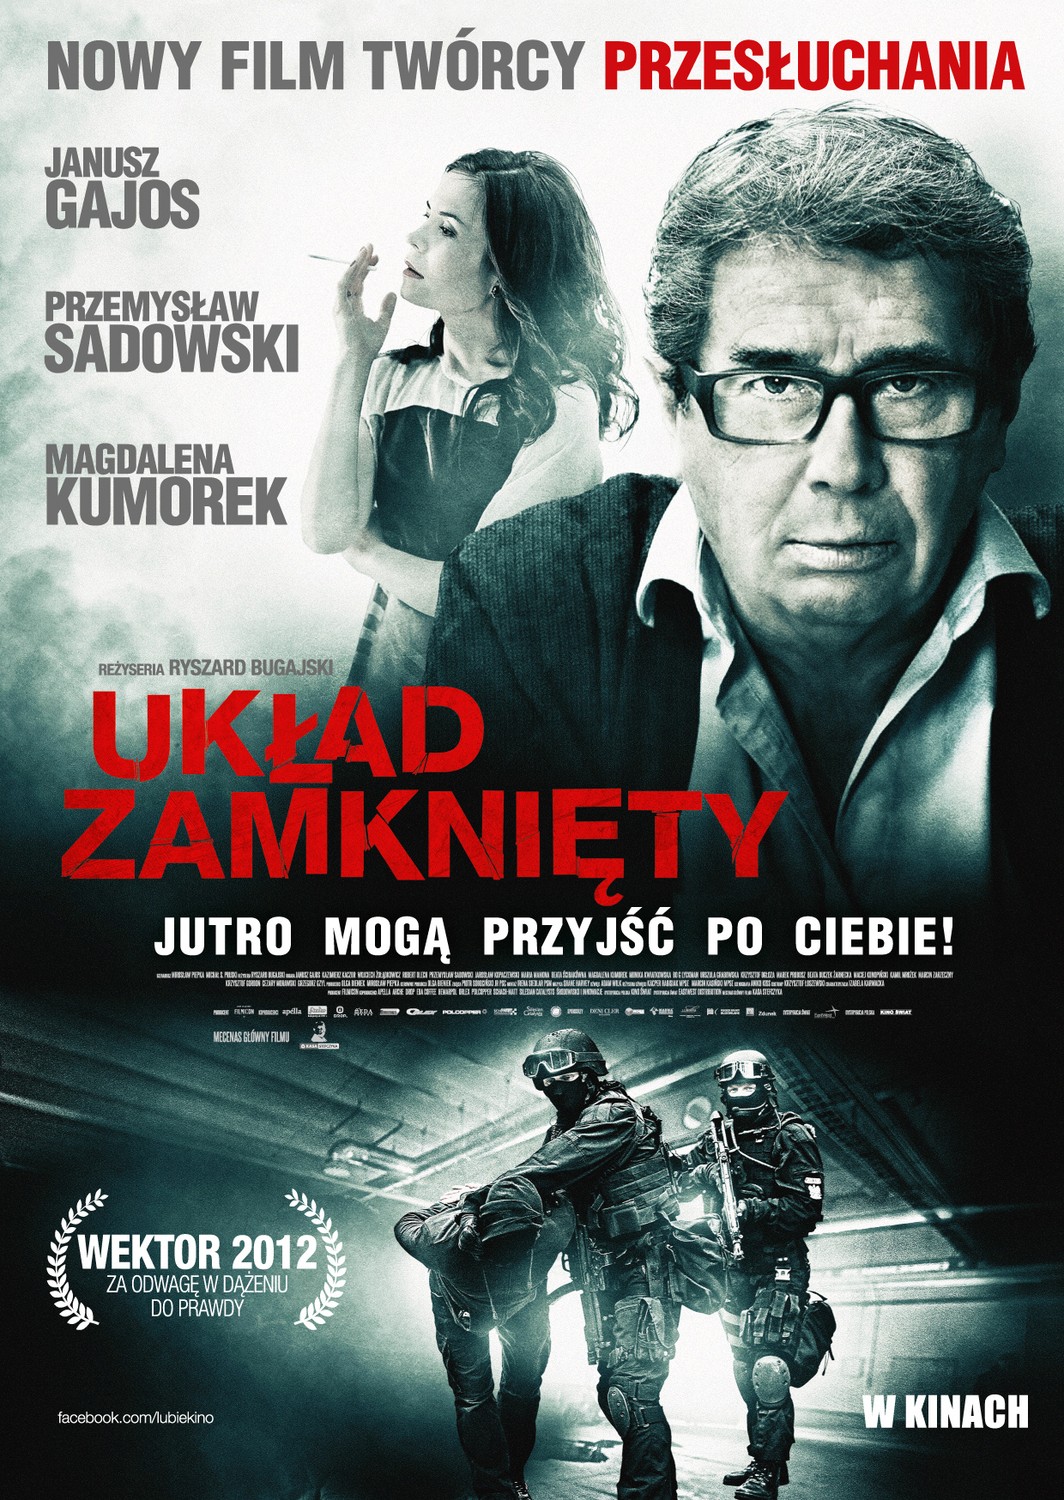 Extra Large Movie Poster Image for Uklad zamkniety 